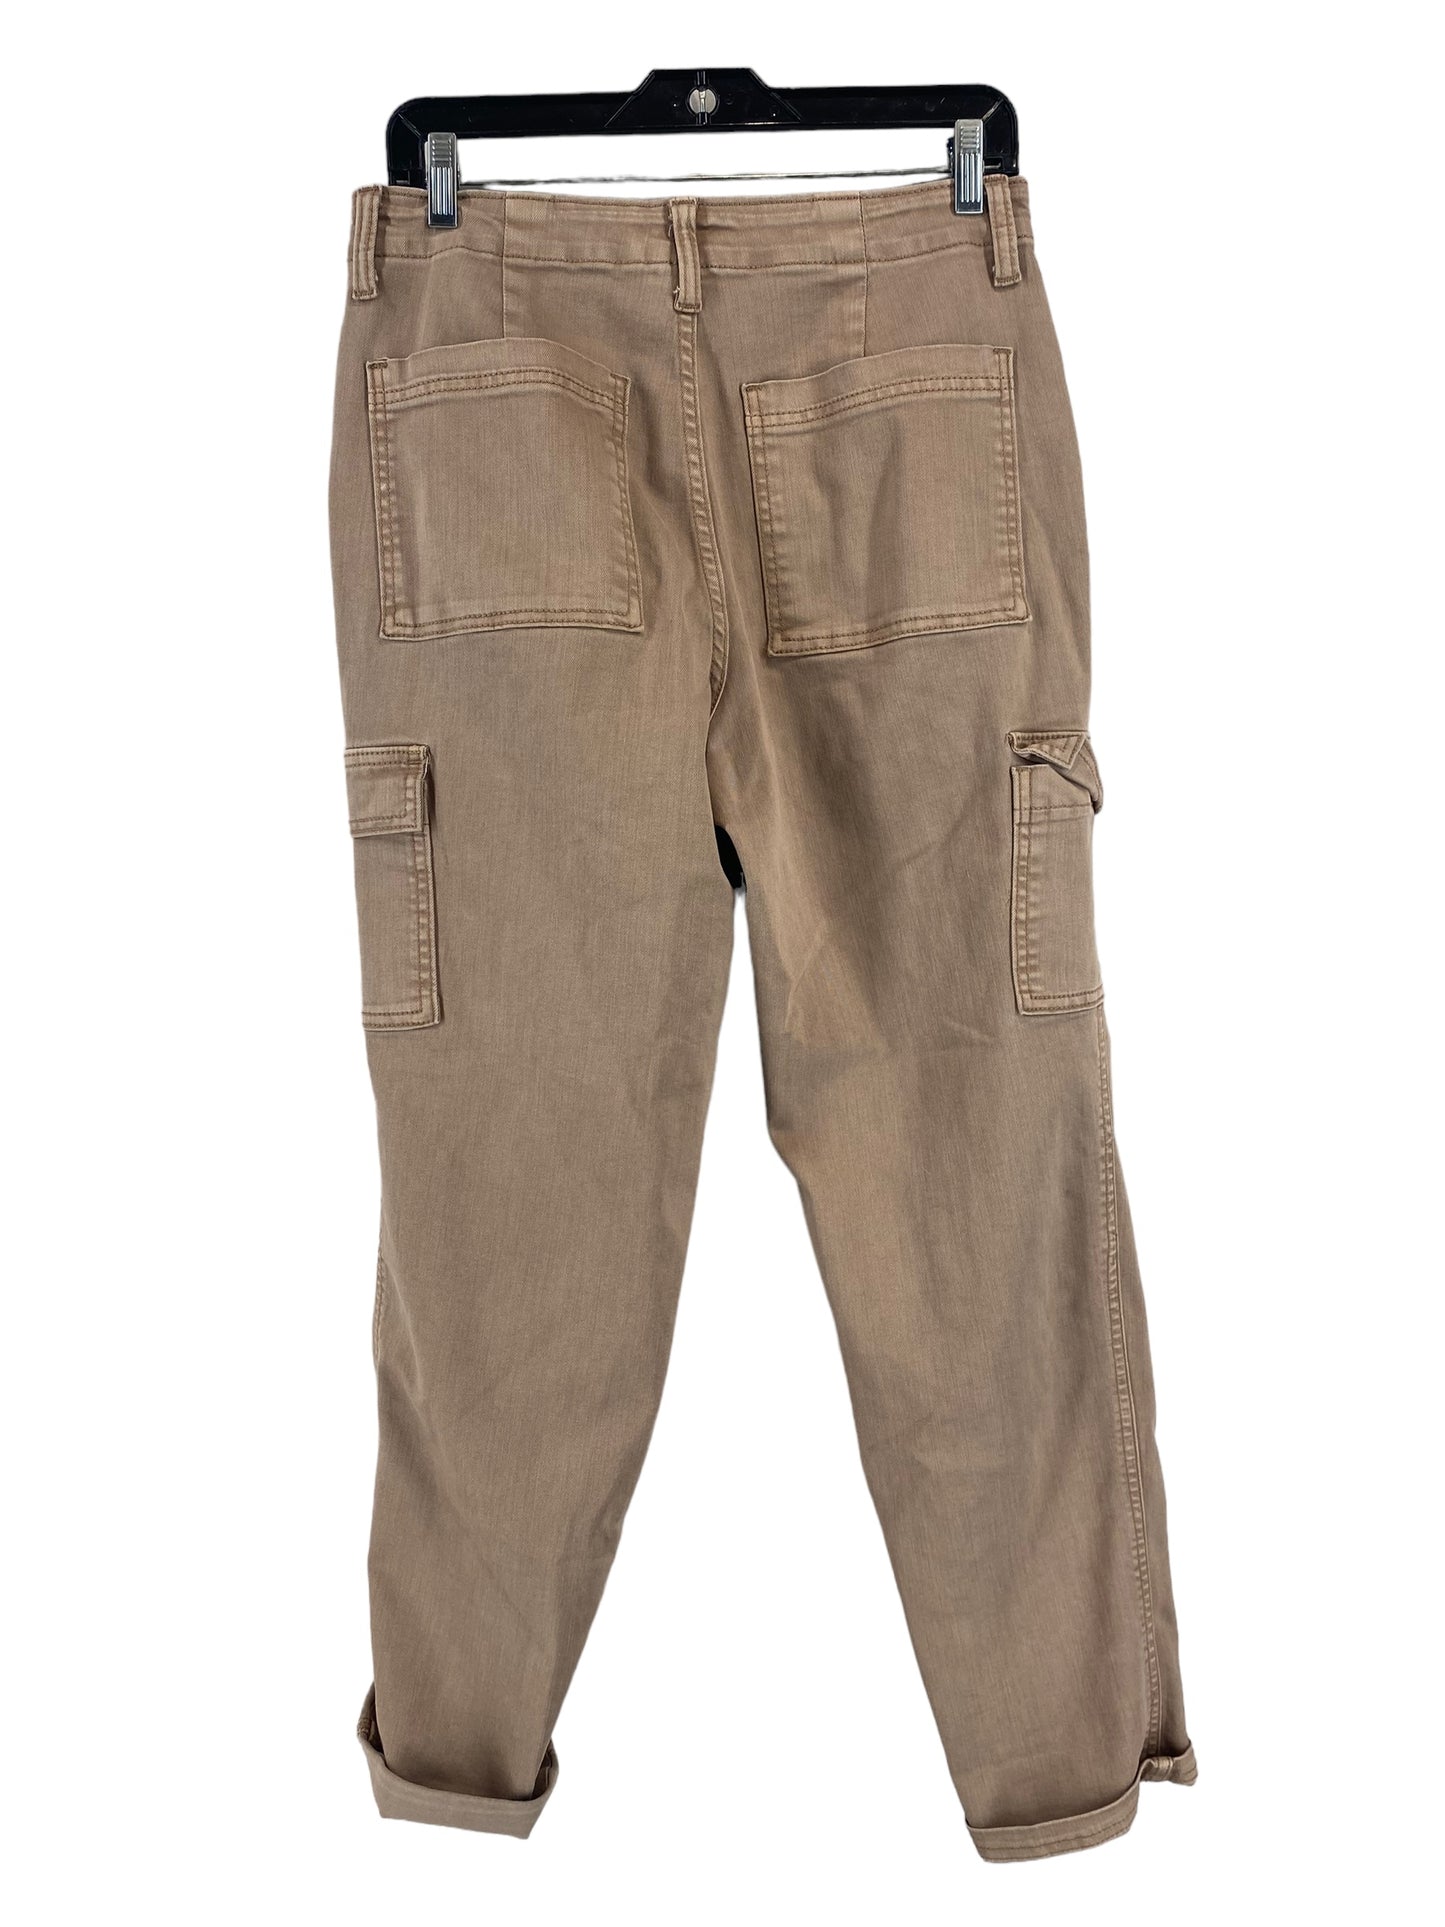 Pants Cargo & Utility By Universal Thread  Size: 8